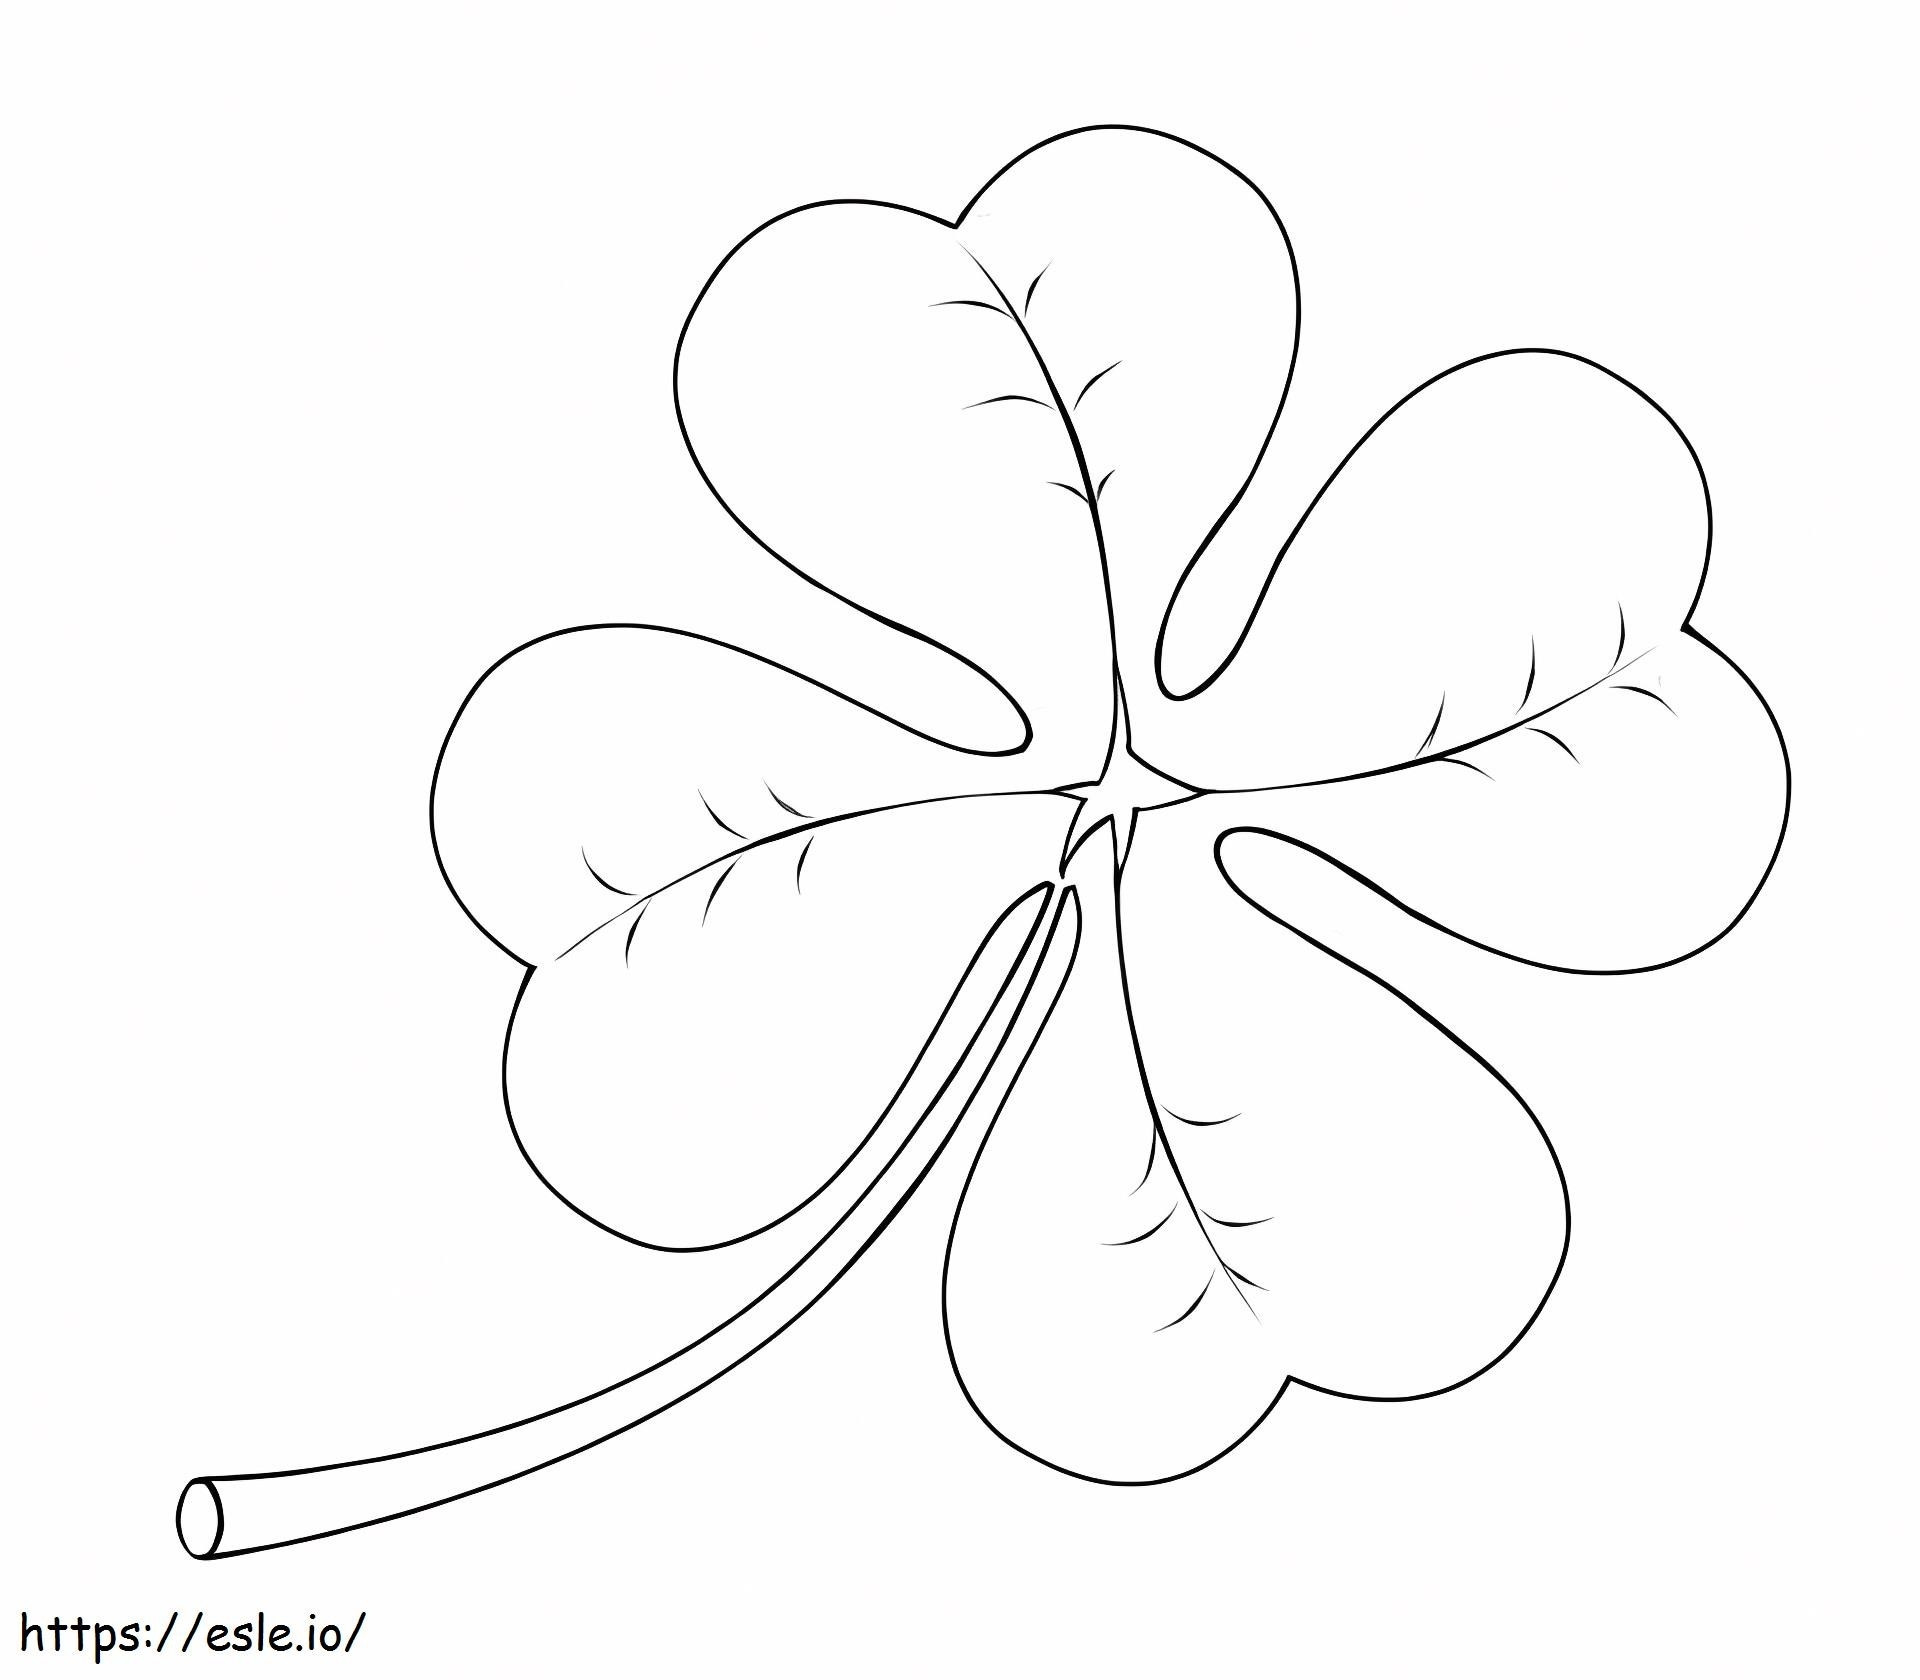 A Four Leaf Clover coloring page